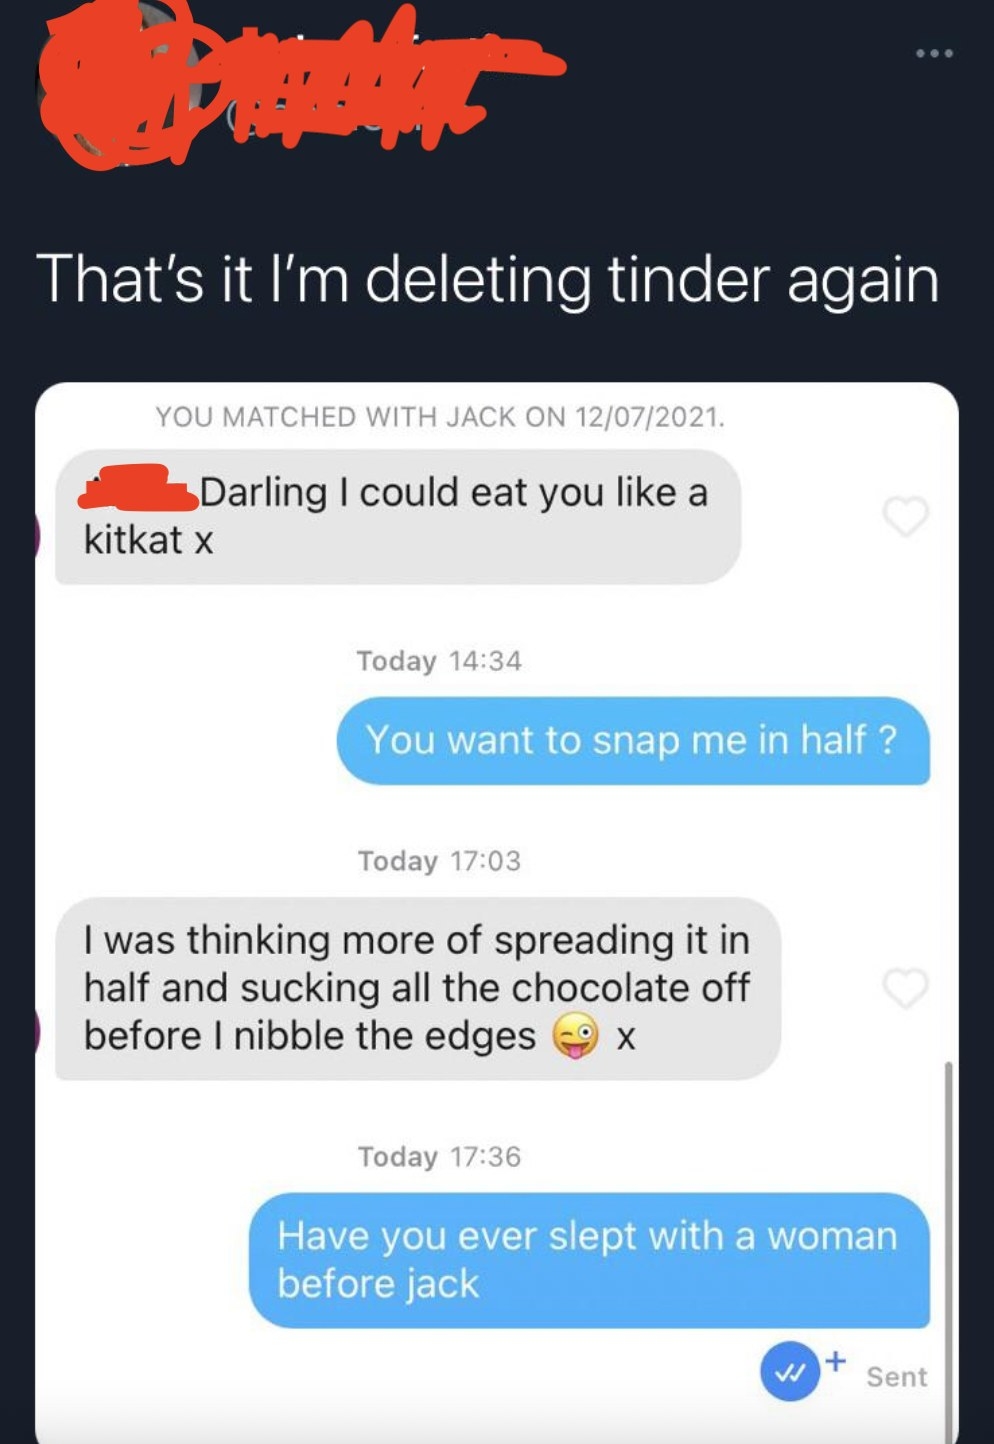 A message from Jack that says, I could ear you like a kit kat, I was thinking of spreading it in half and sucking all the chocolate off before I nibble the edges, and she responds, Have you ever slept with a woman before Jack